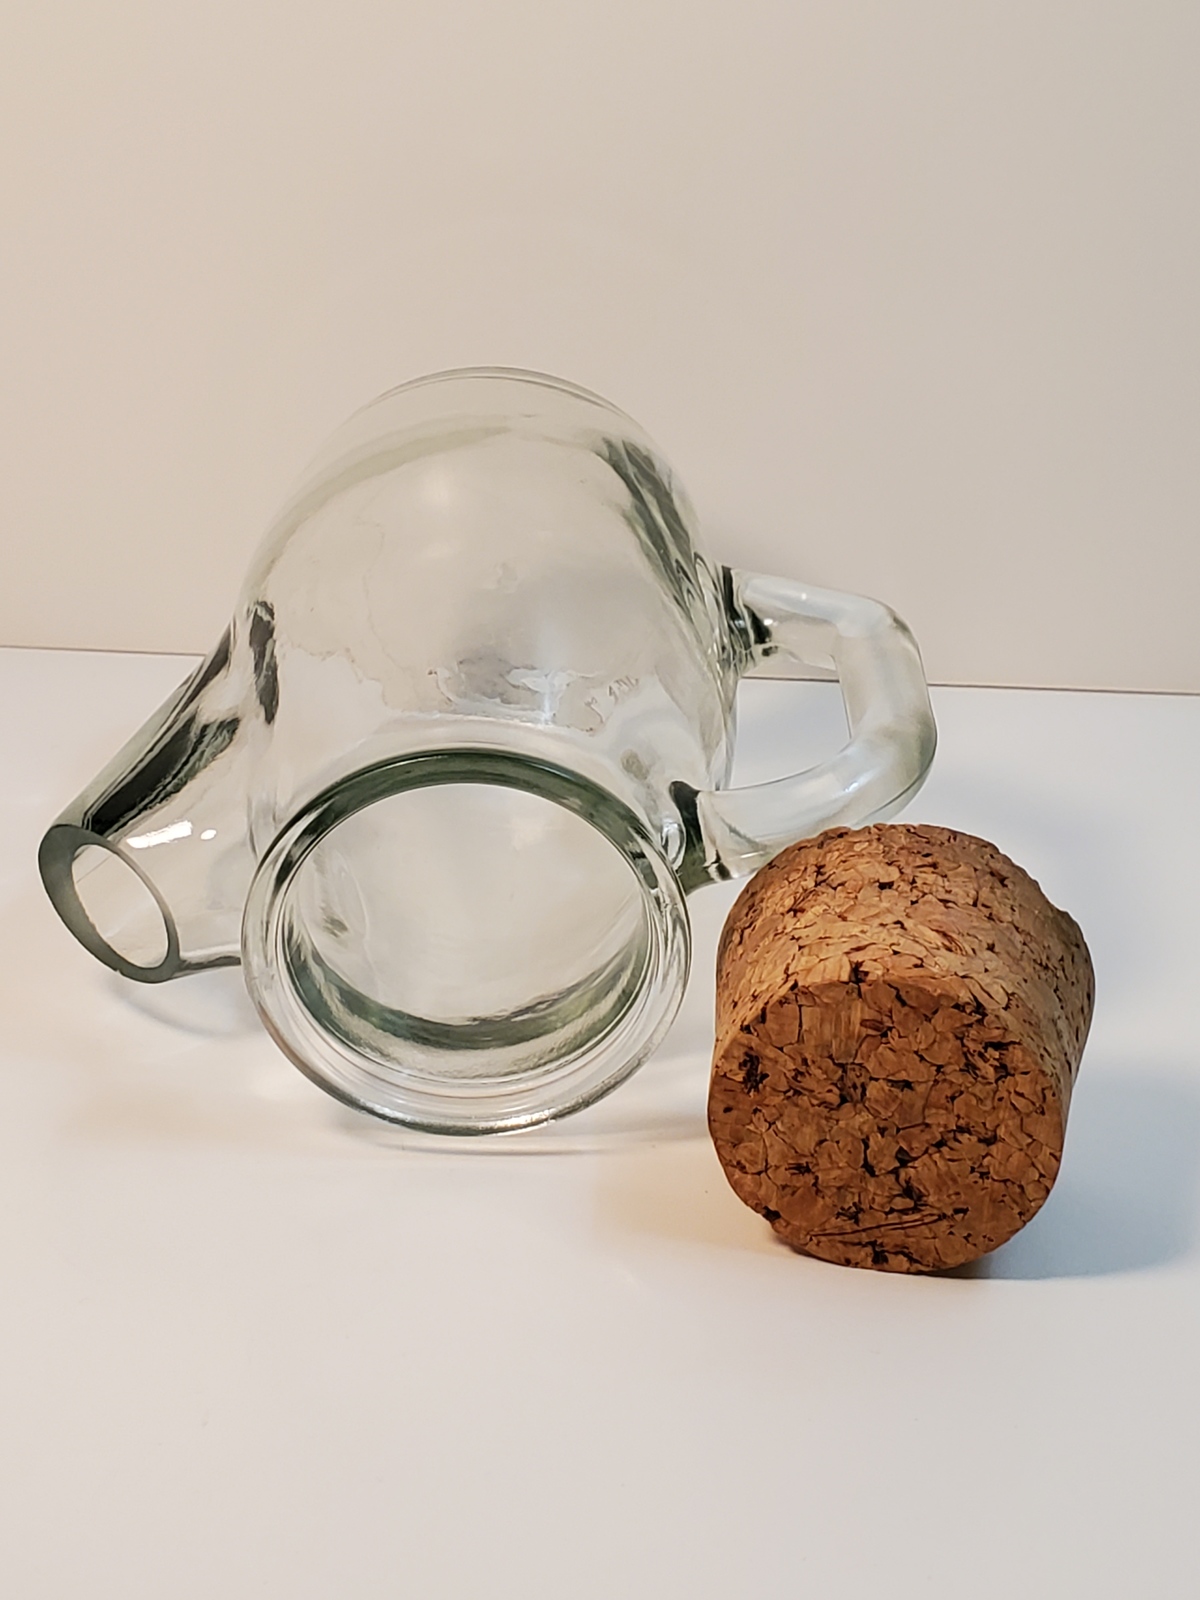 Small glass pitcher with cork stopper